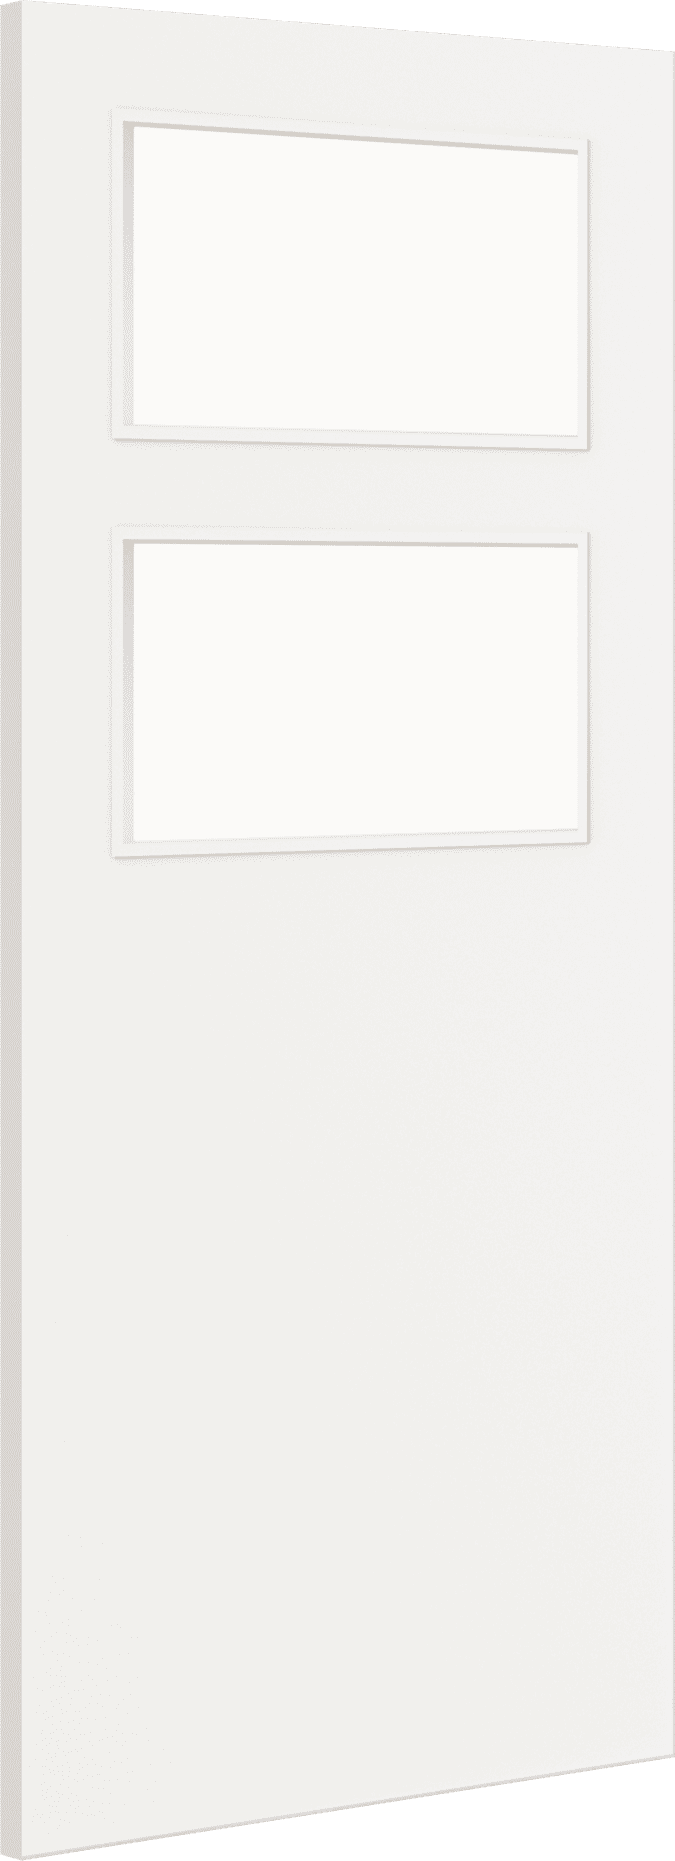 1981mm x 762mm x 44mm (30") Architectural Paint Grade White 02 Clear Glazed Fire Door Blank